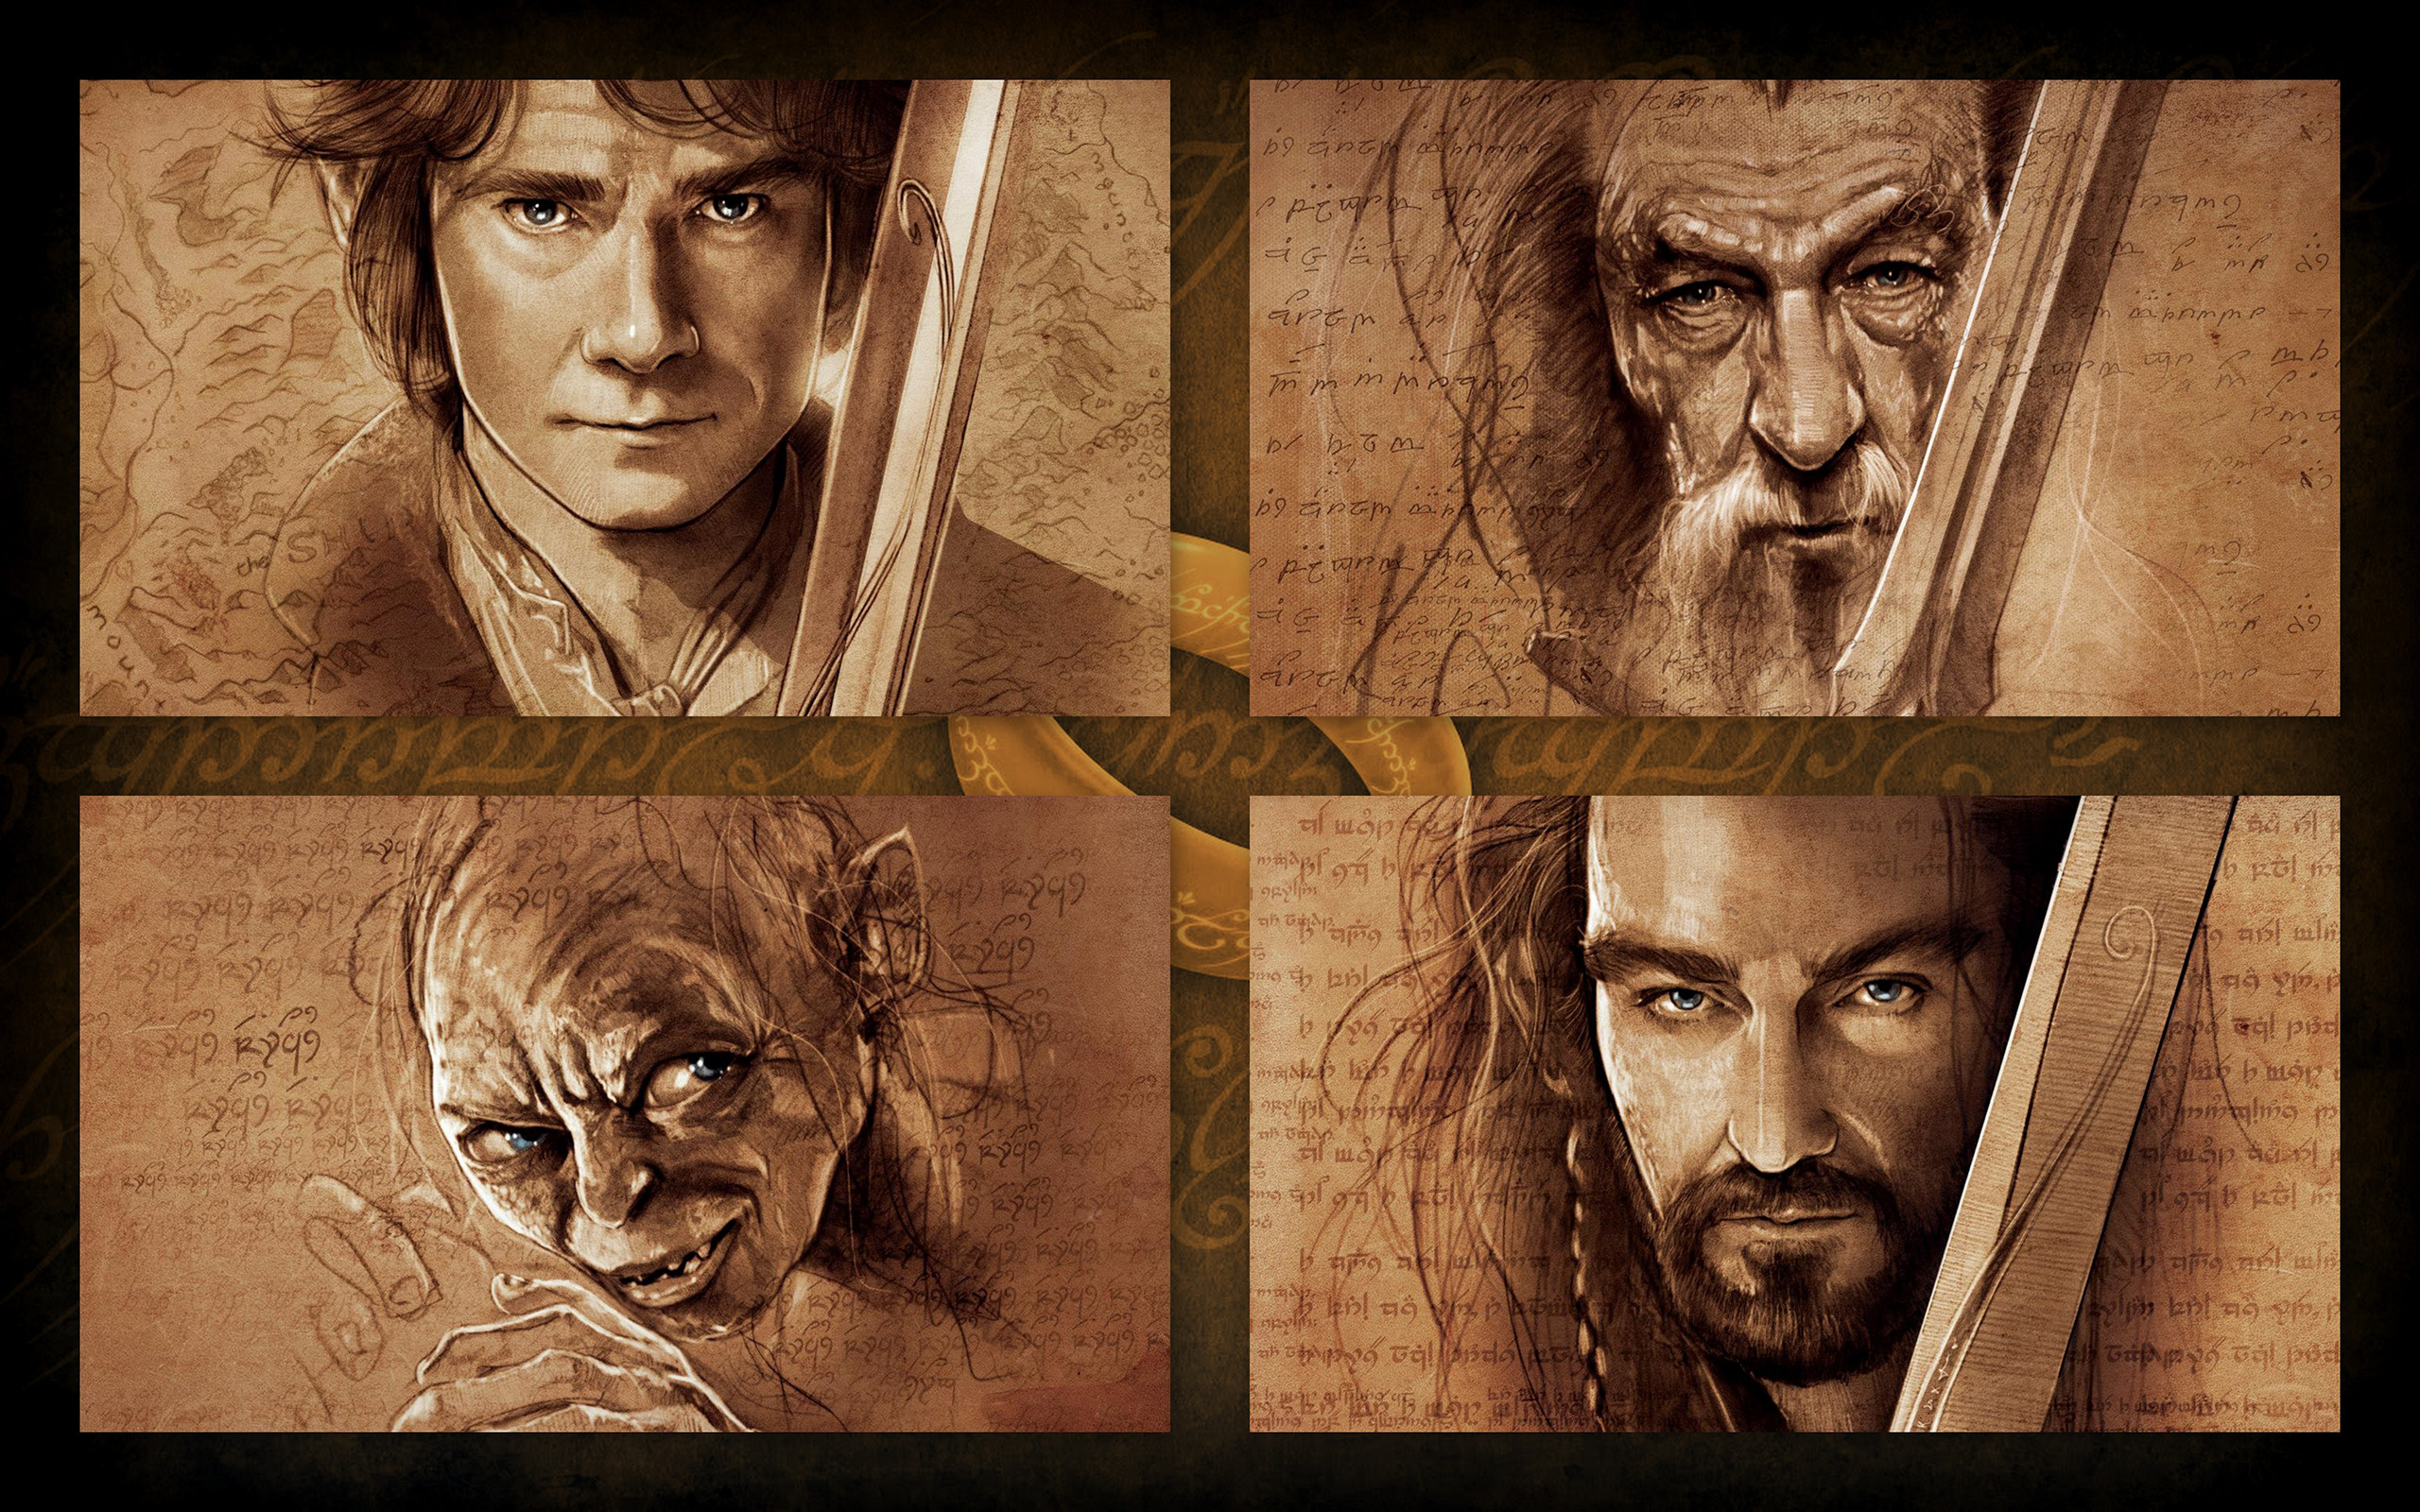 2560x1600 Movie - The Hobbit: An Unexpected Journey Wallpaper